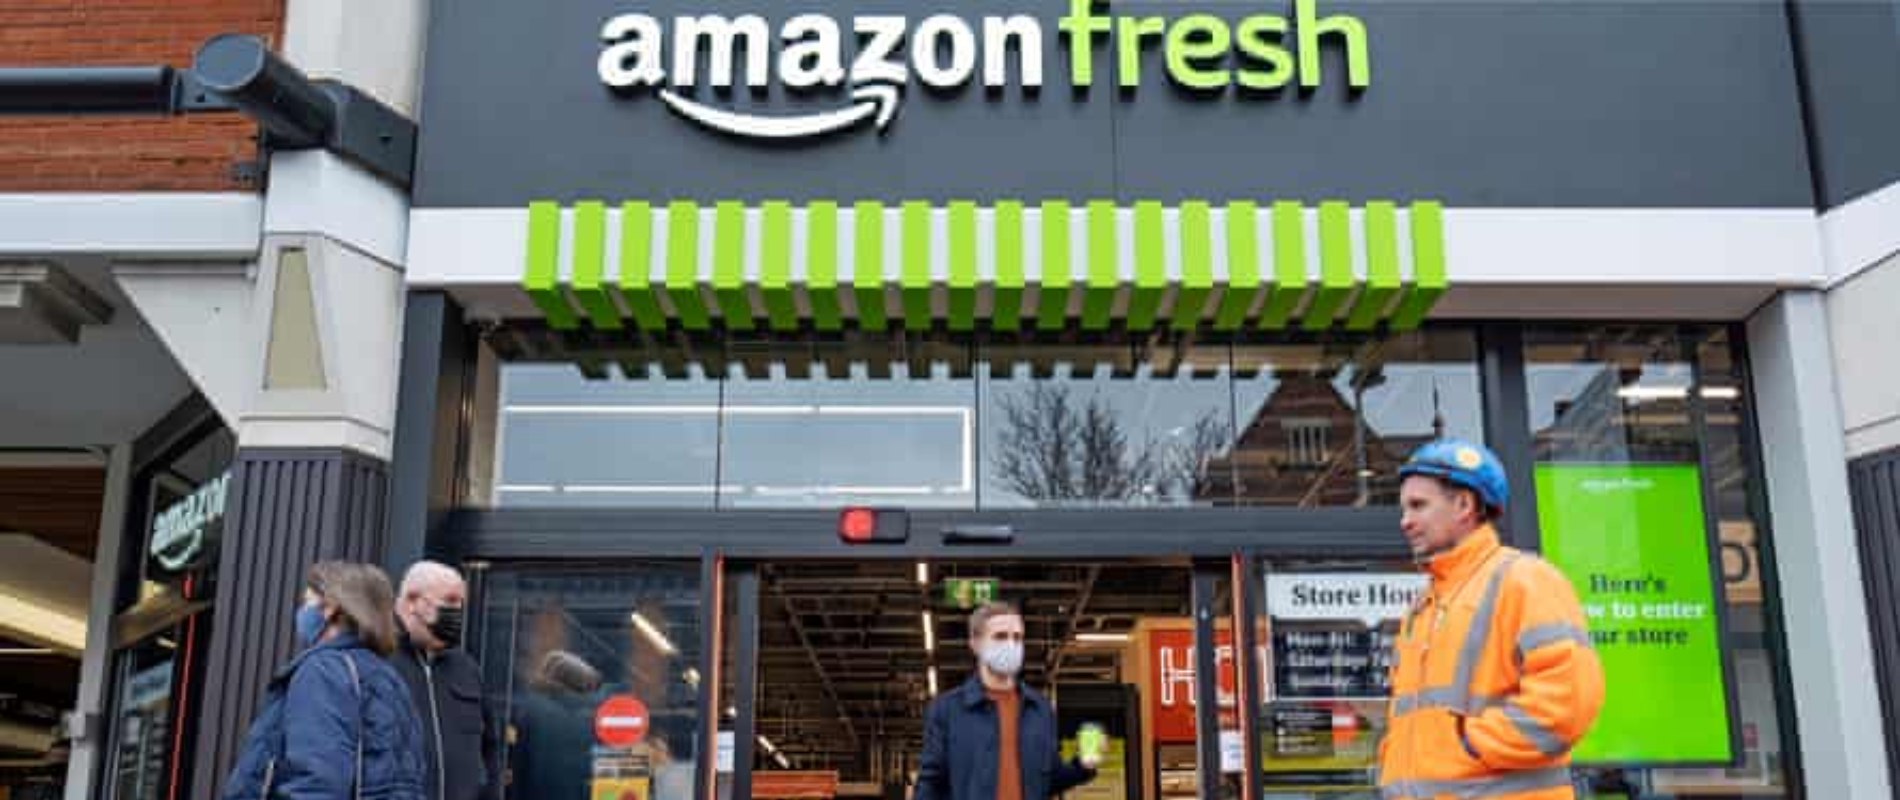 Brain and Poulter | INSIDE THE UK’S FIRST AMAZON FRESH STORE